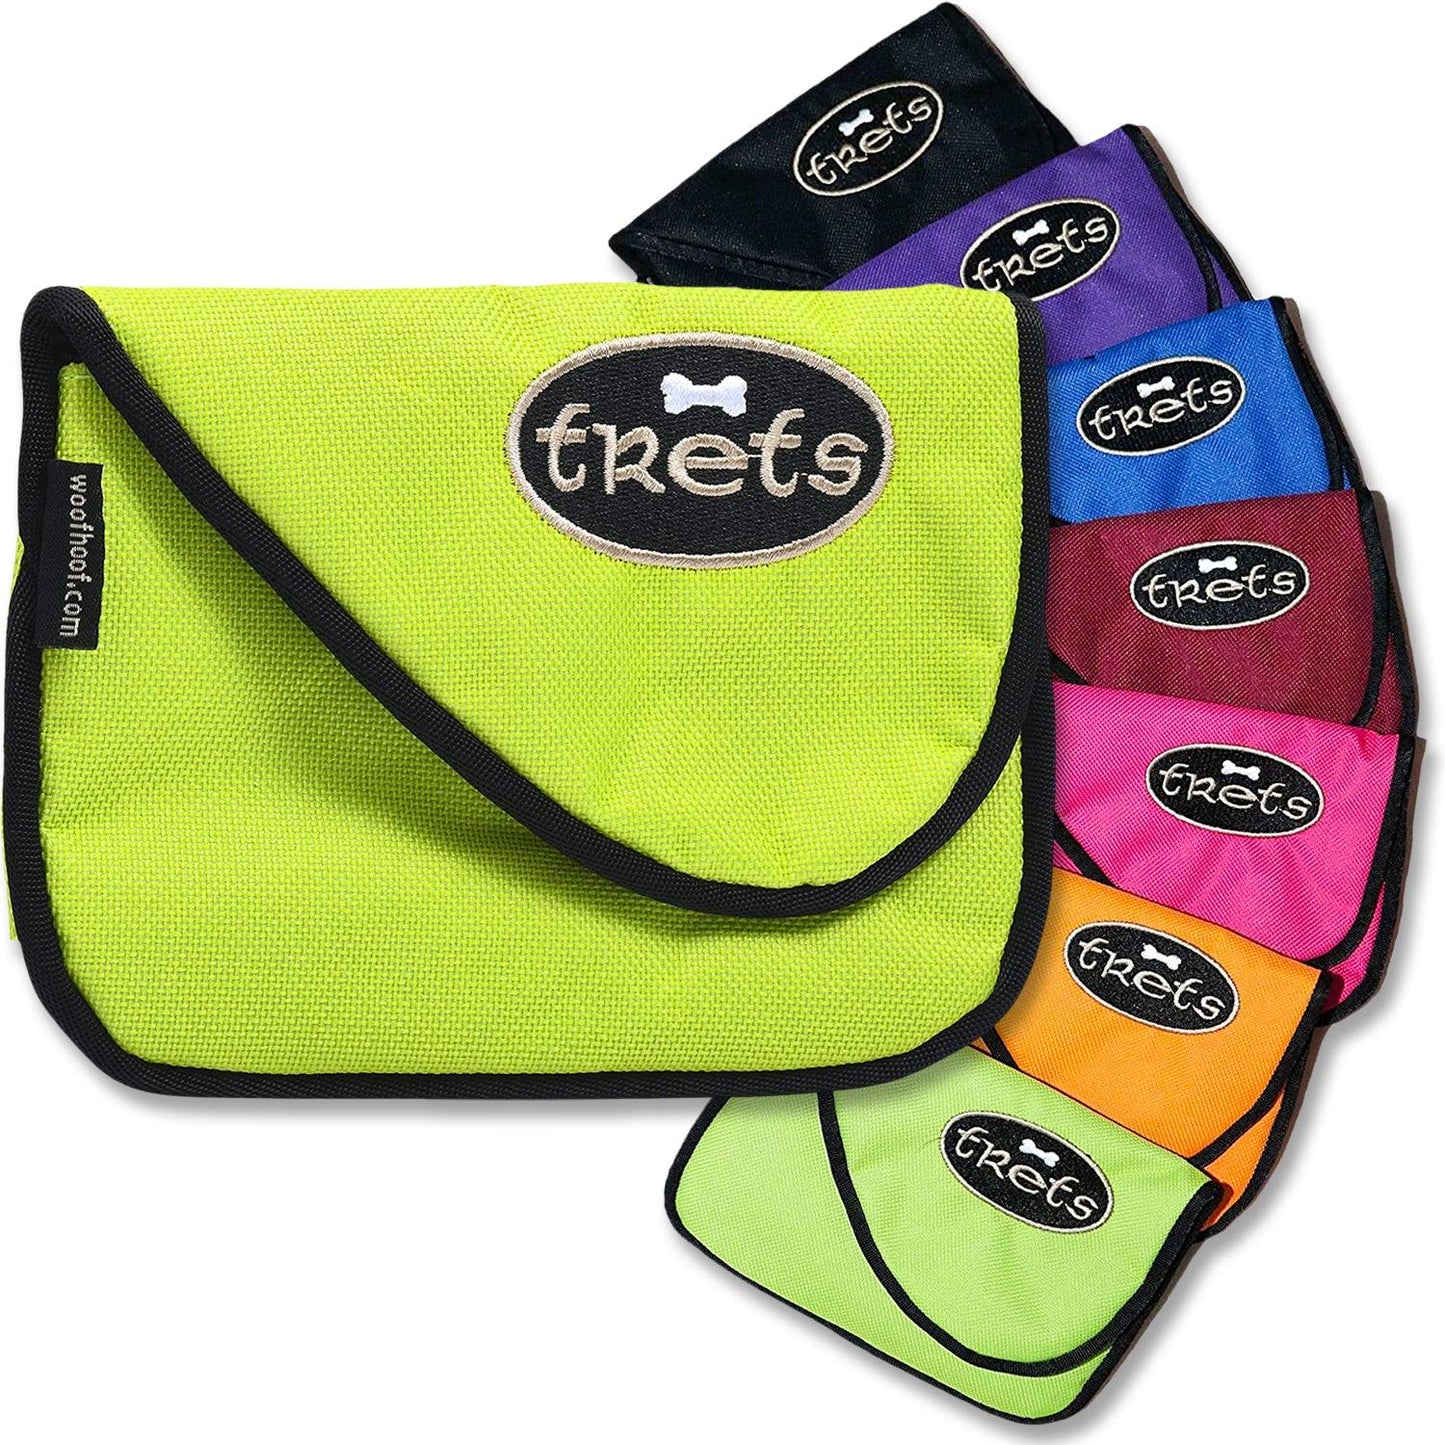 Lime dog treat pouch shown with multiple color options